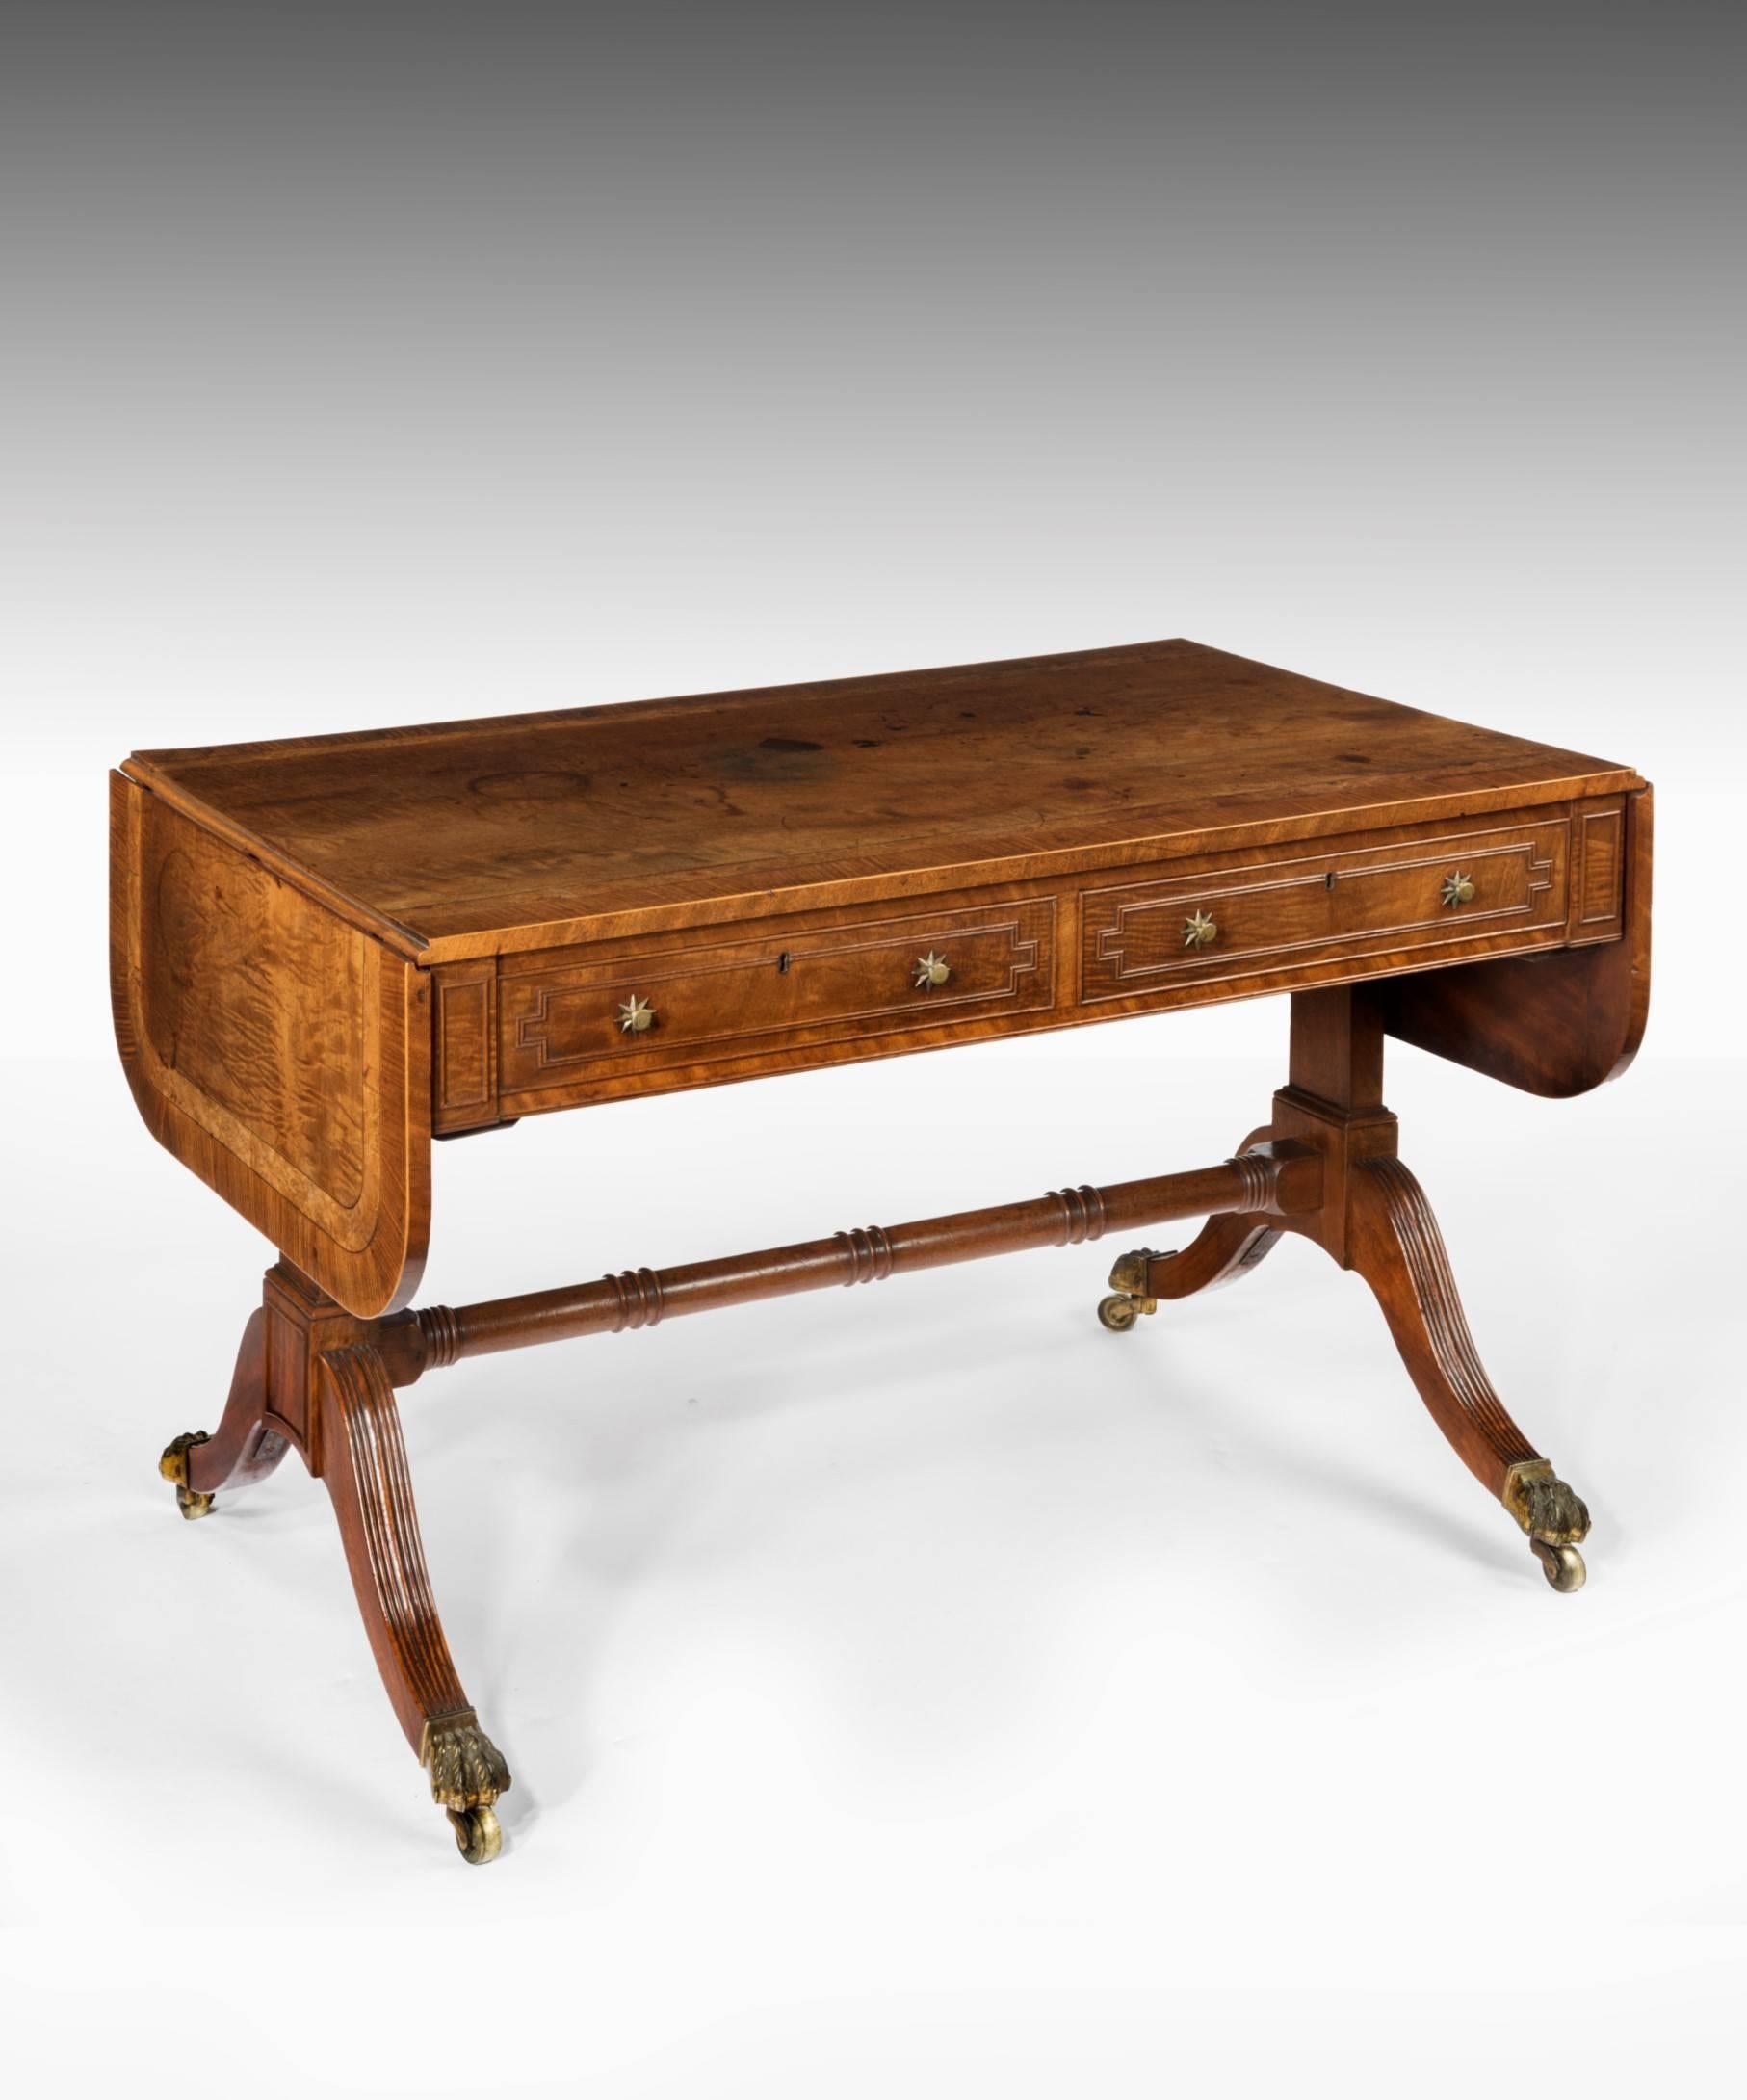 A beautifully patinated Regency period mahogany sofa table; the sofa table's well figured mahogany top crossbanded in bird's eye maple and rosewood above two frieze drawers which are decorated with a double cock bead moulding raised on end supports